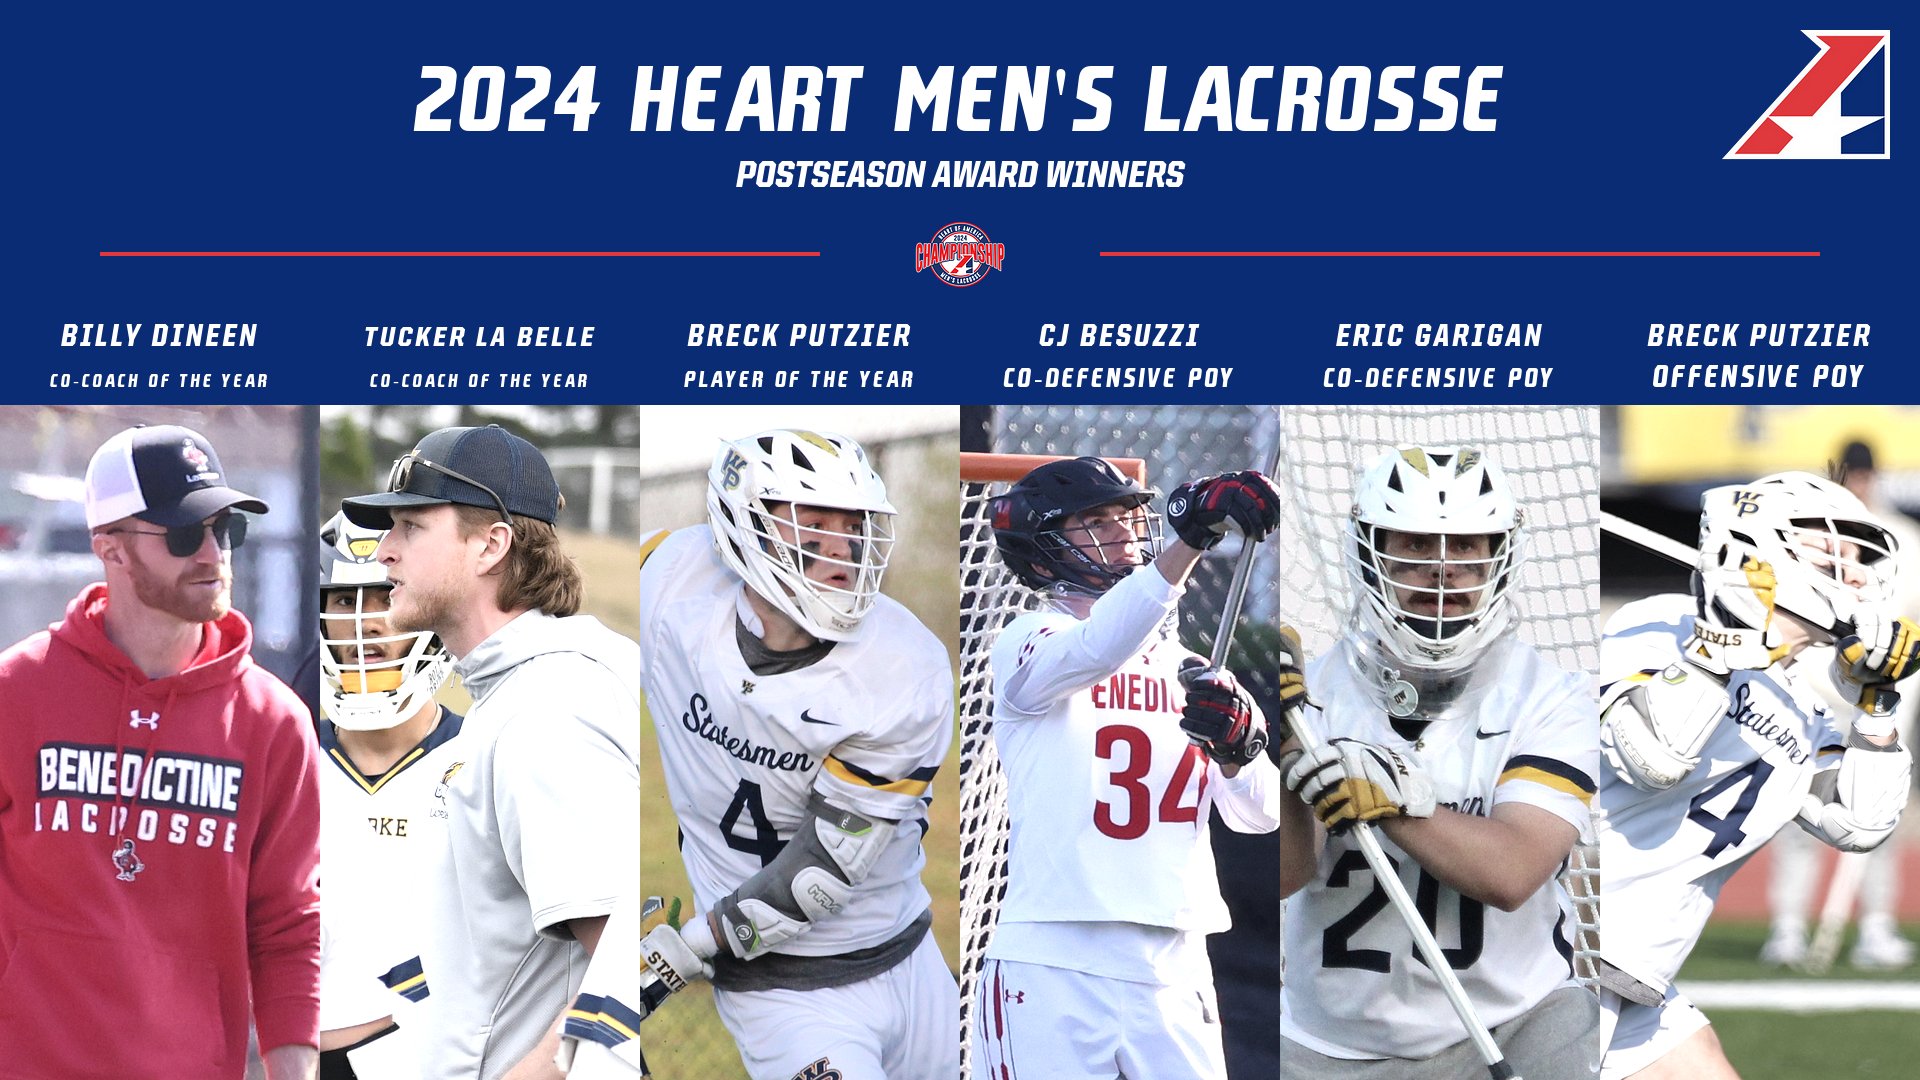 2024 Heart Men’s Lacrosse All-Conference Teams Announced